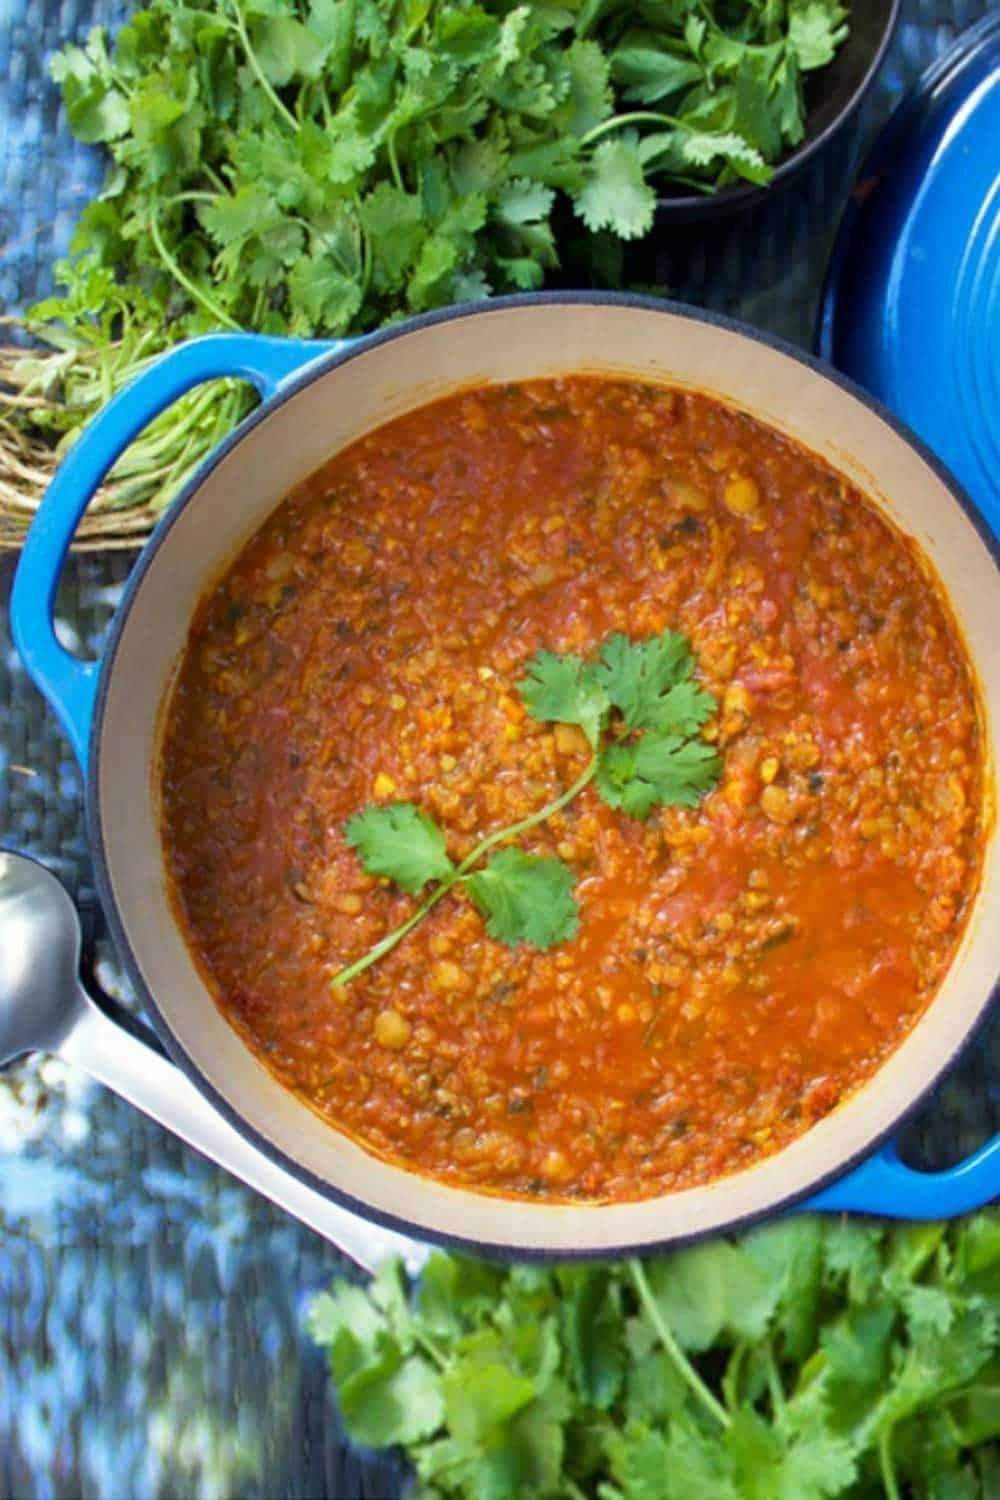 Spice up your Dinner Routine with Mouthwatering Moroccan Lentil Soup Recipe